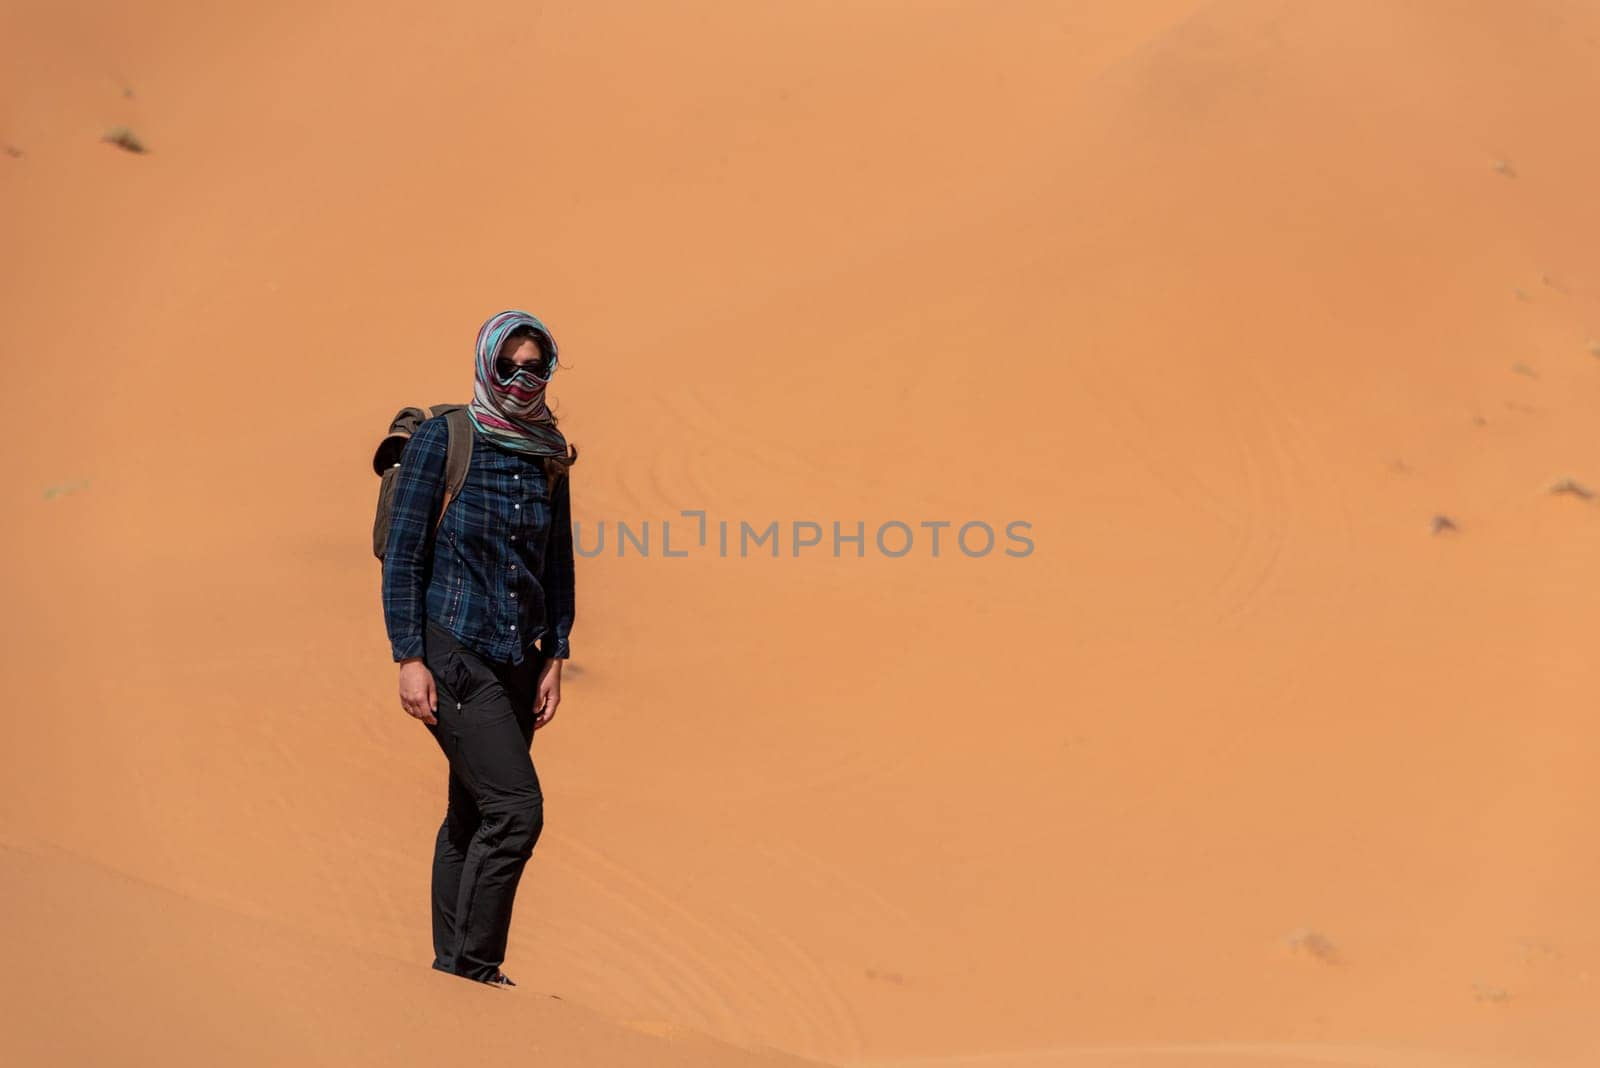 A person walking through the Erg Chebbi desert in the African Sahara by imagoDens